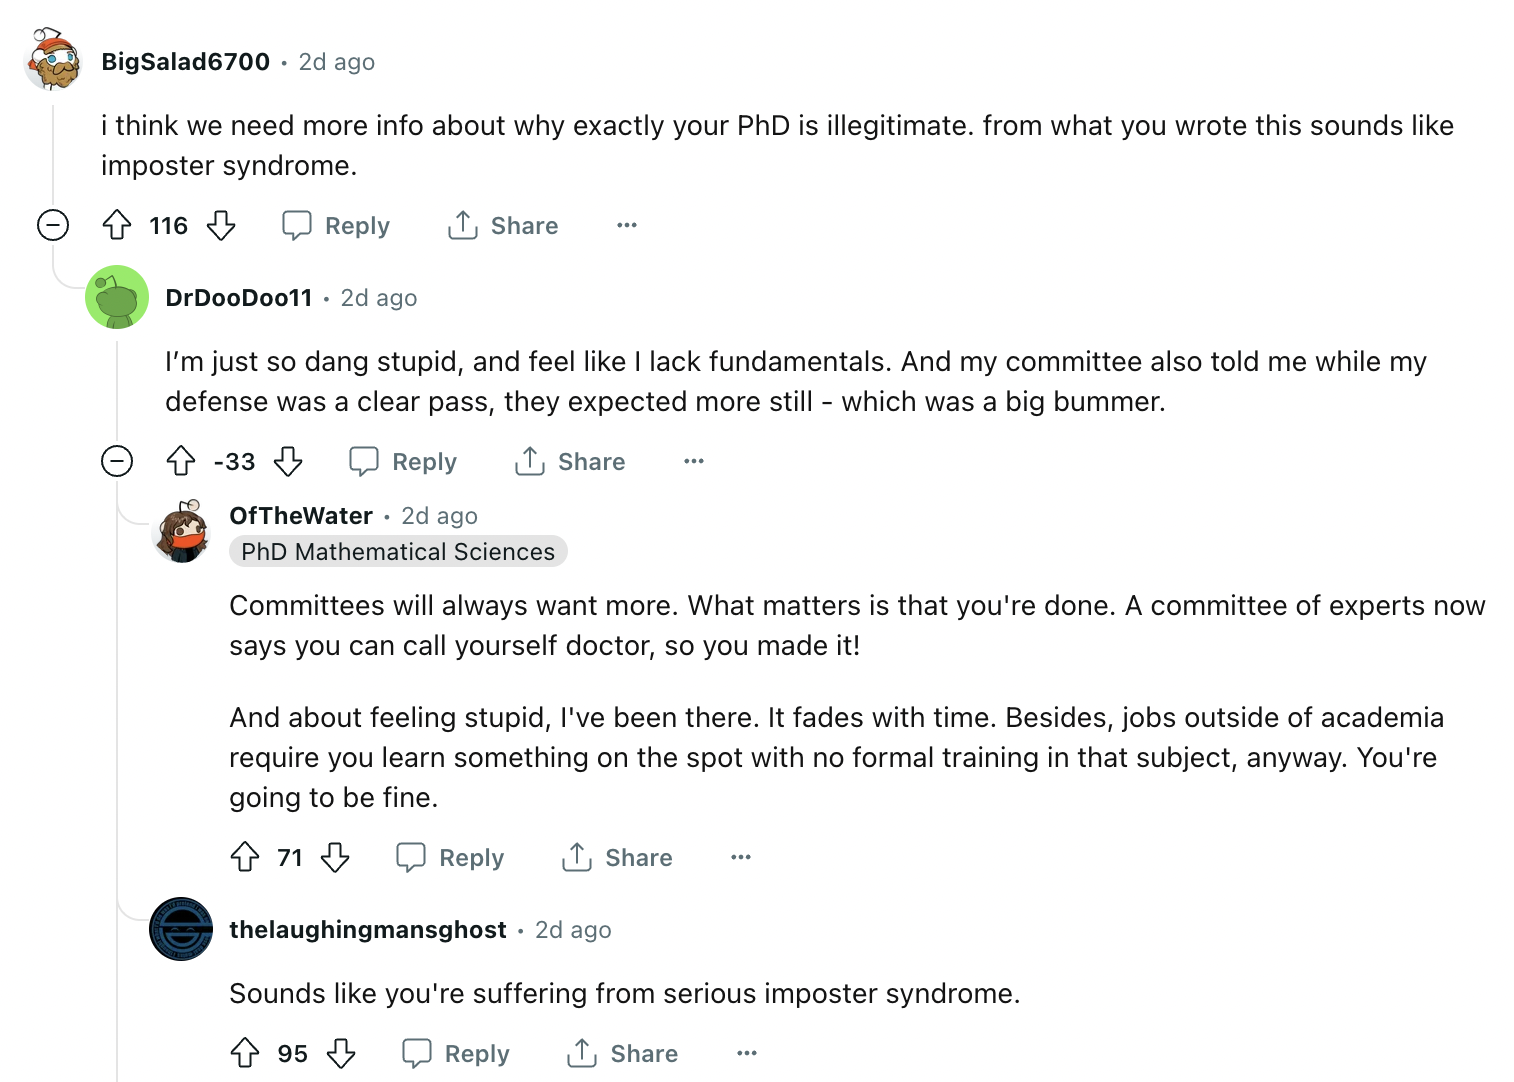 document - BigSalad6700 2d ago i think we need more info about why exactly your PhD is illegitimate. from what you wrote this sounds imposter syndrome. 116 DrDooDoo11 2d ago . I'm just so dang stupid, and feel I lack fundamentals. And my committee also to